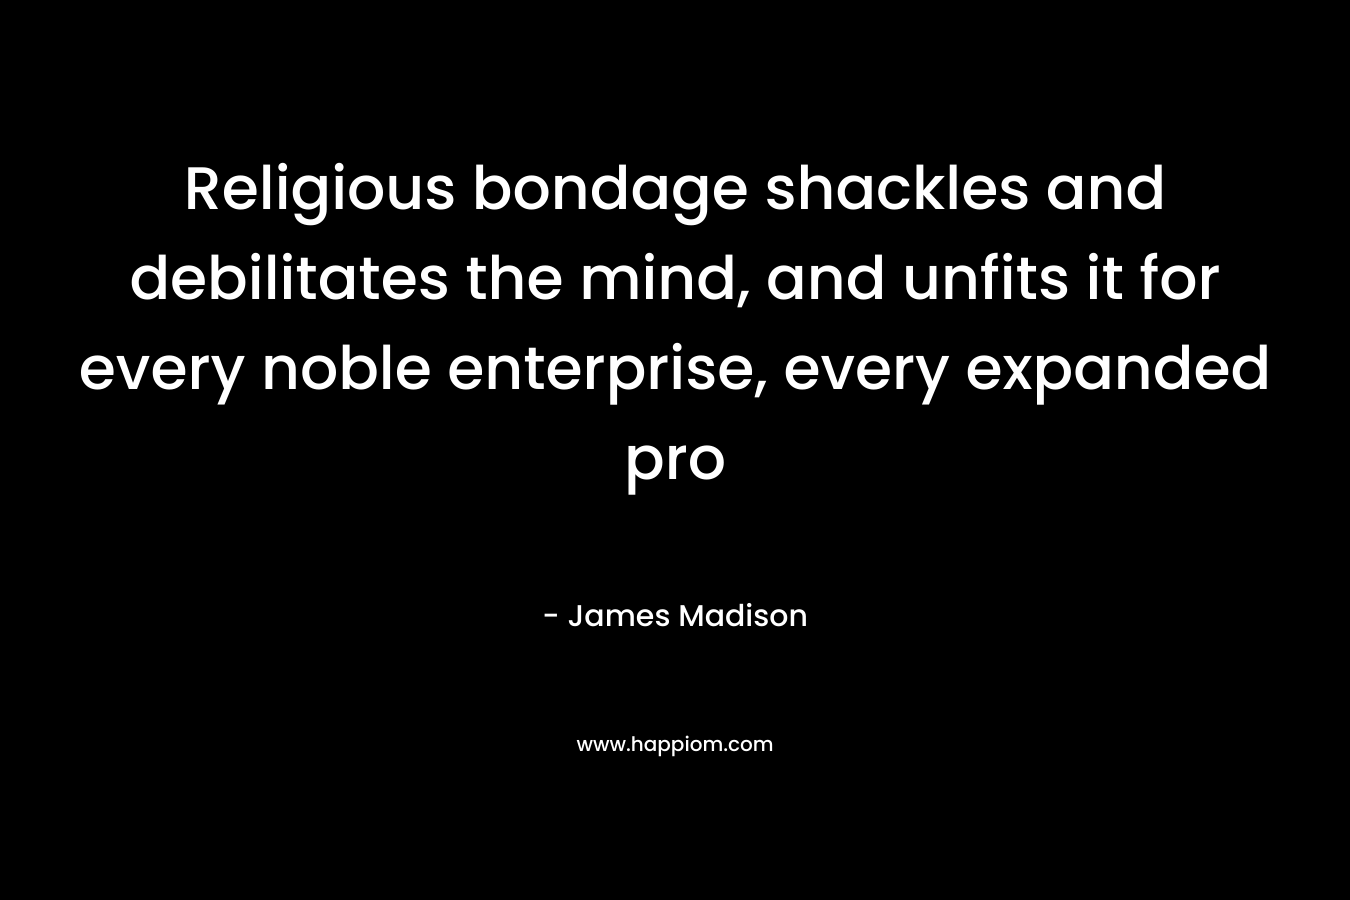 Religious bondage shackles and debilitates the mind, and unfits it for every noble enterprise, every expanded pro